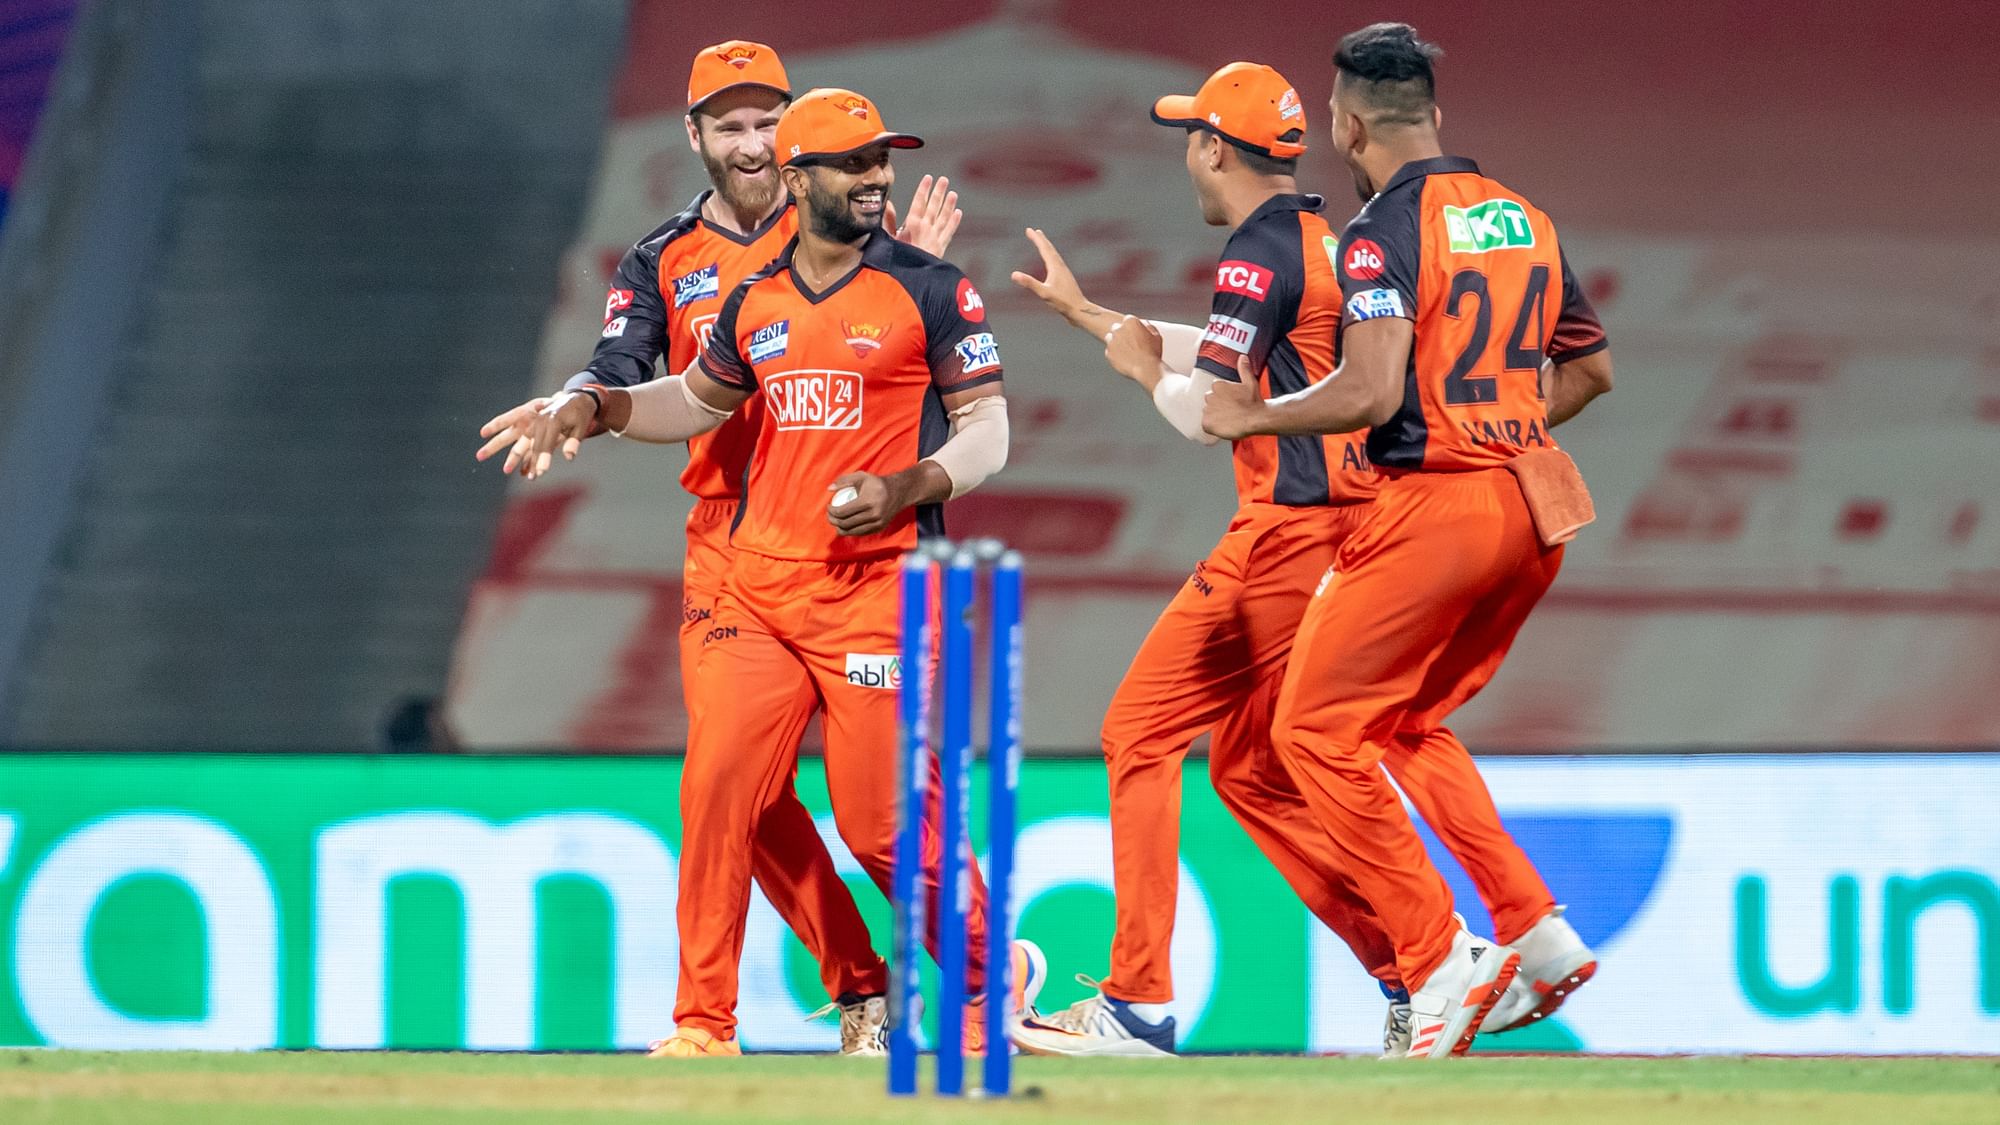 <div class="paragraphs"><p>Full squad of Sunrisers Hyderabad after the IPL 2023 retentions and trading window closed on 15 November 2022</p></div>